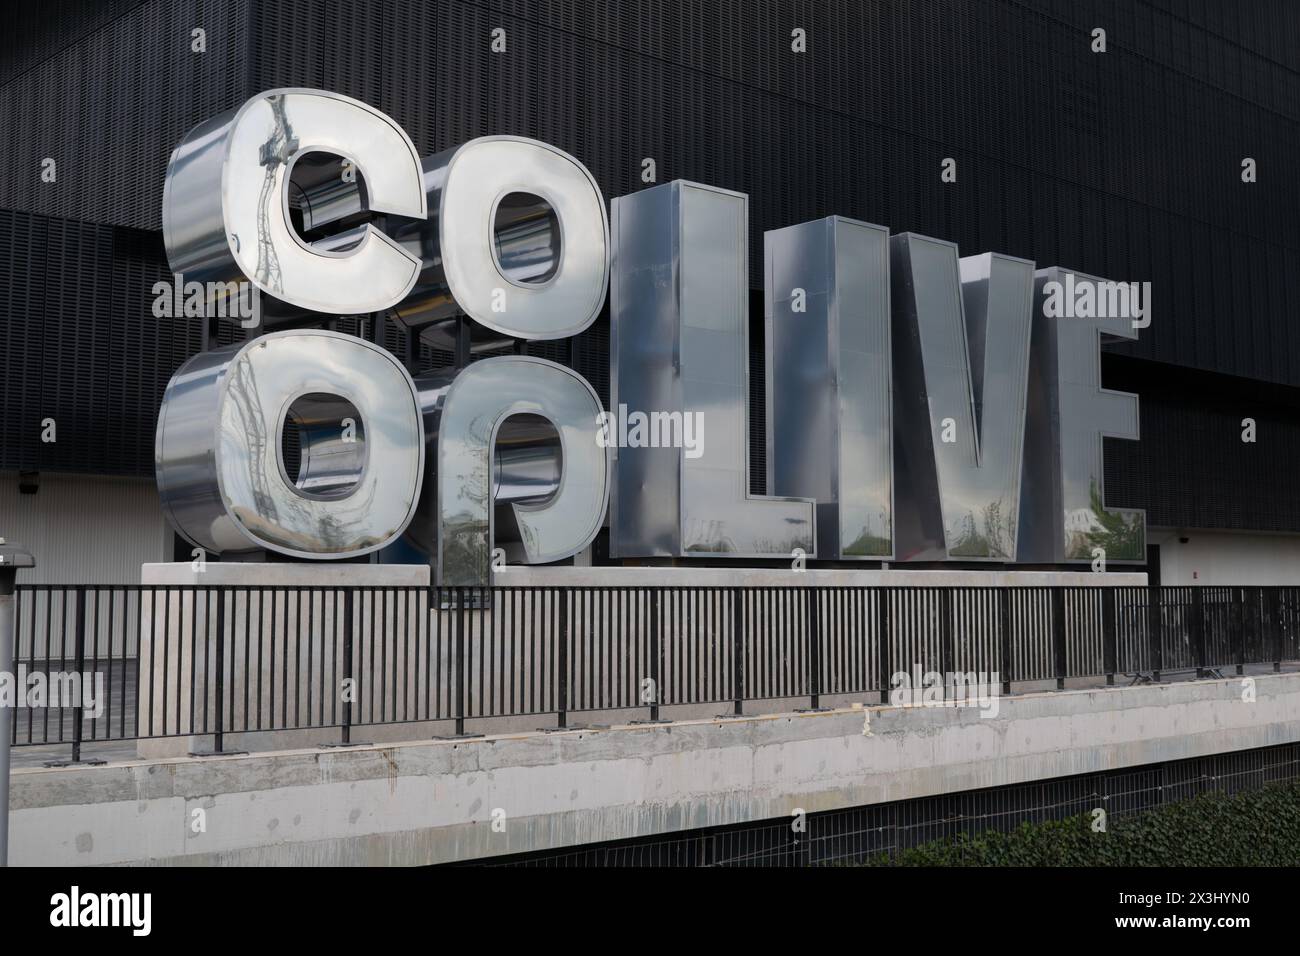 Co-op live arena at the Etihad Campus, Manchester UK. Sign. Stock Photo